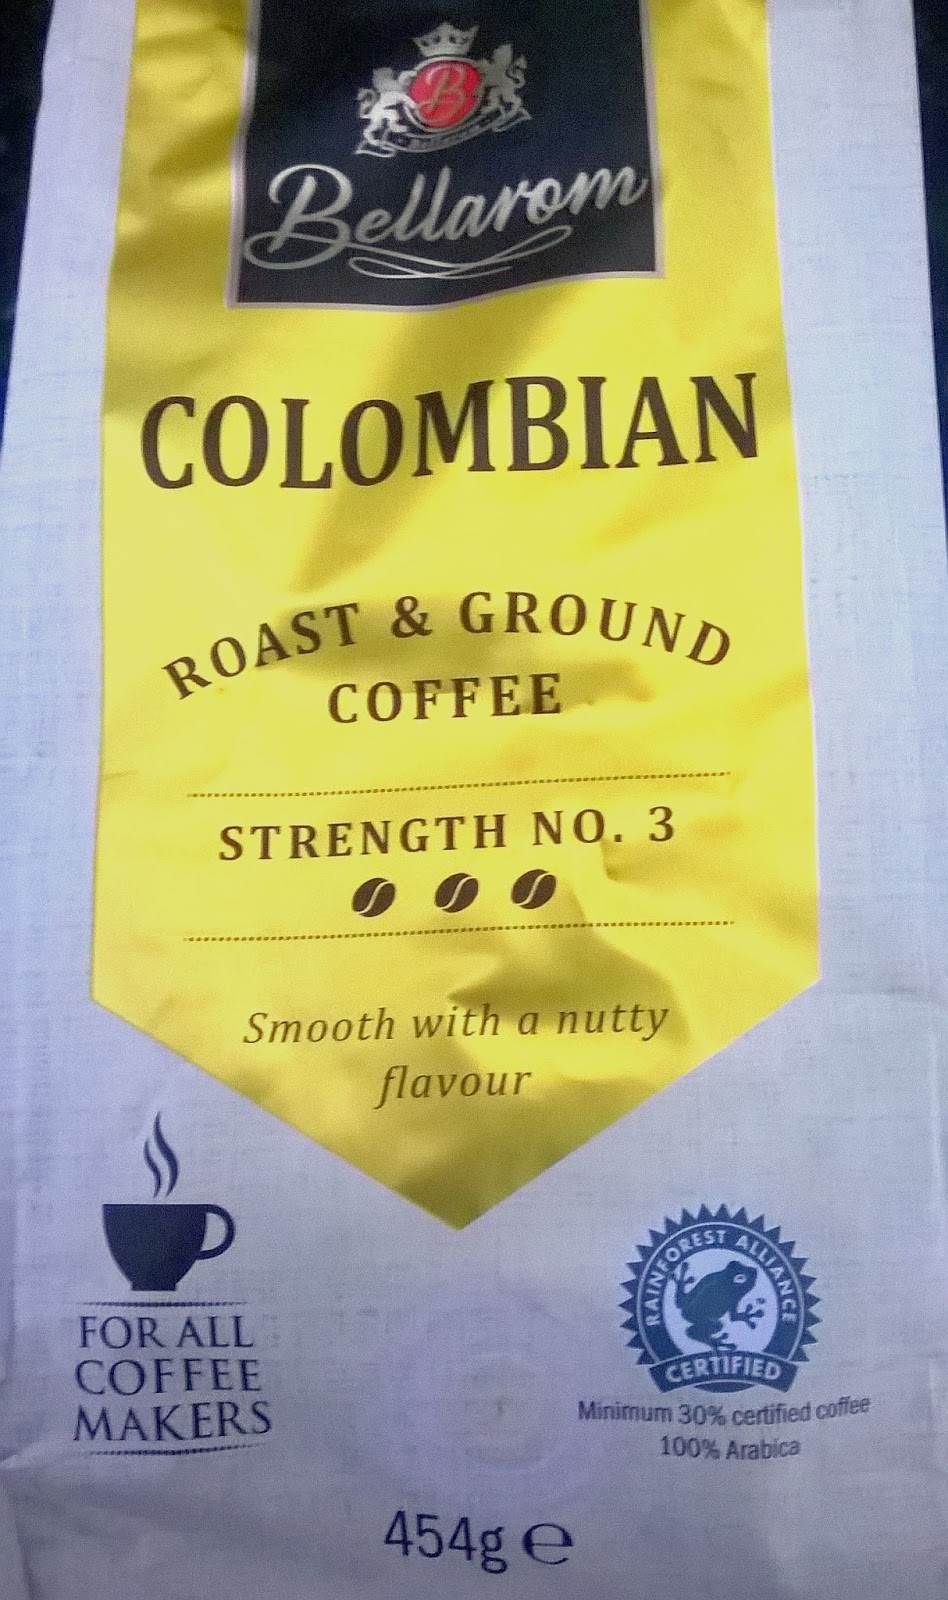 Smell the tea and coffee Lidl Bellarom Colombian Coffee